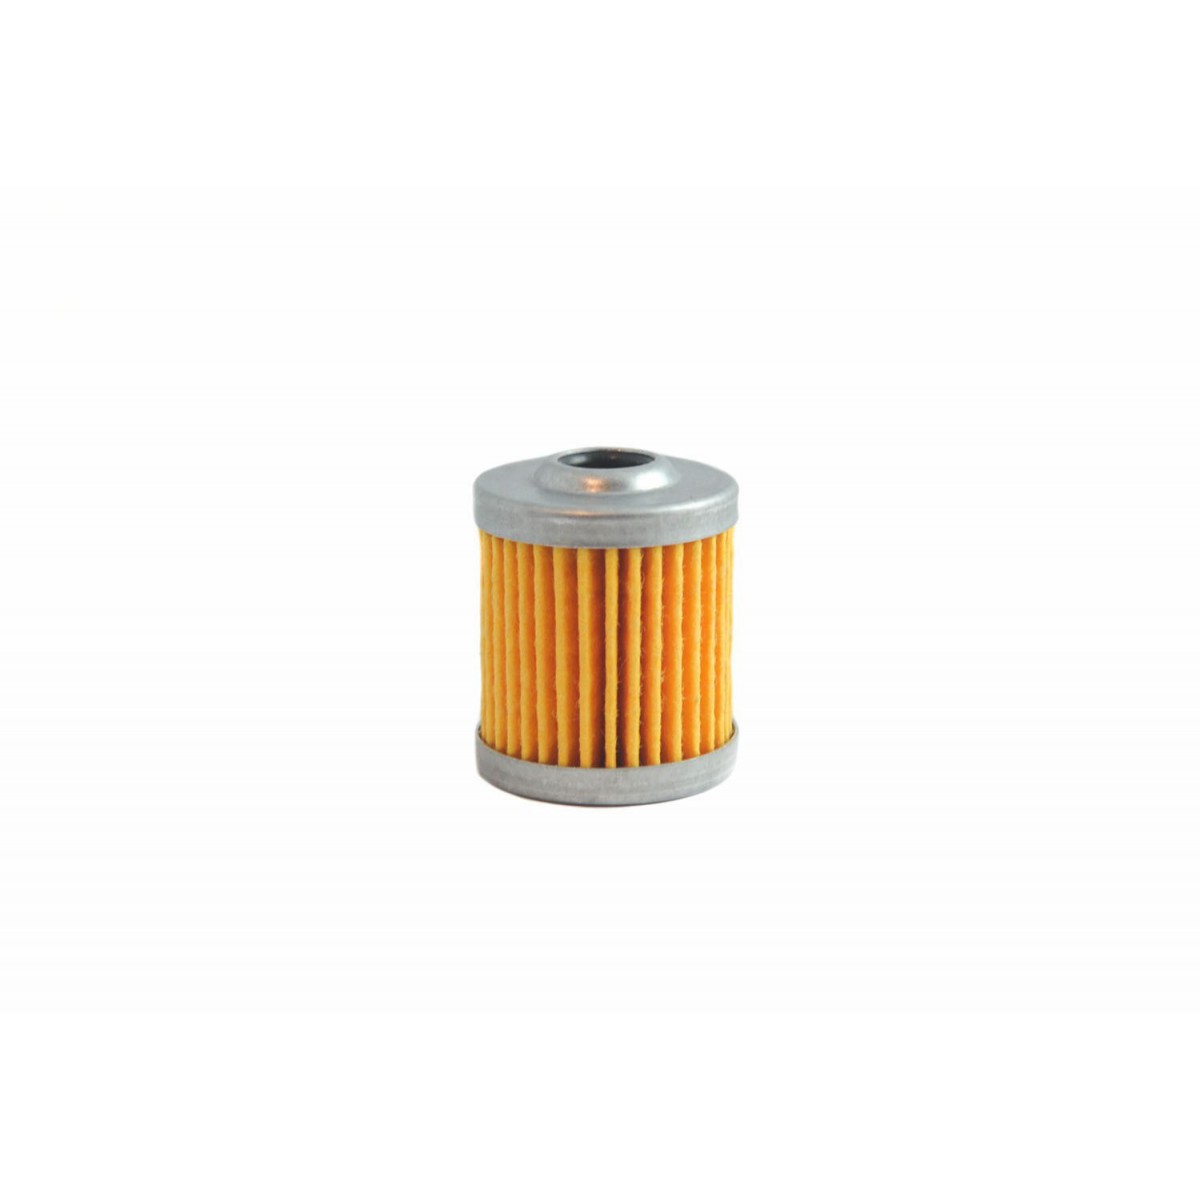 Fuel filter F-35 mm L-42 mm with a rubber